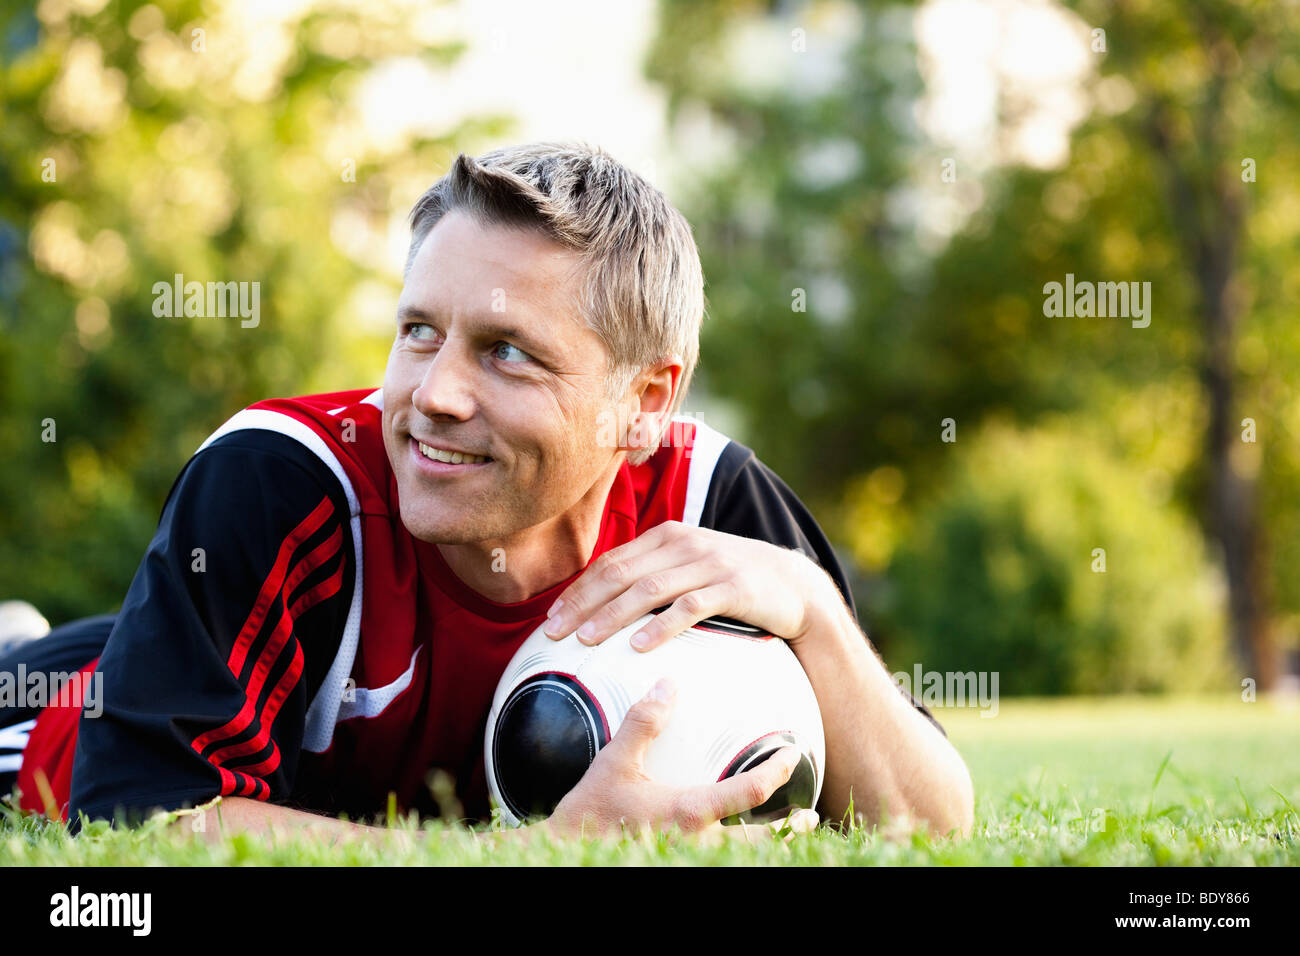 Soccer Player Keeping Ball Stock Photo